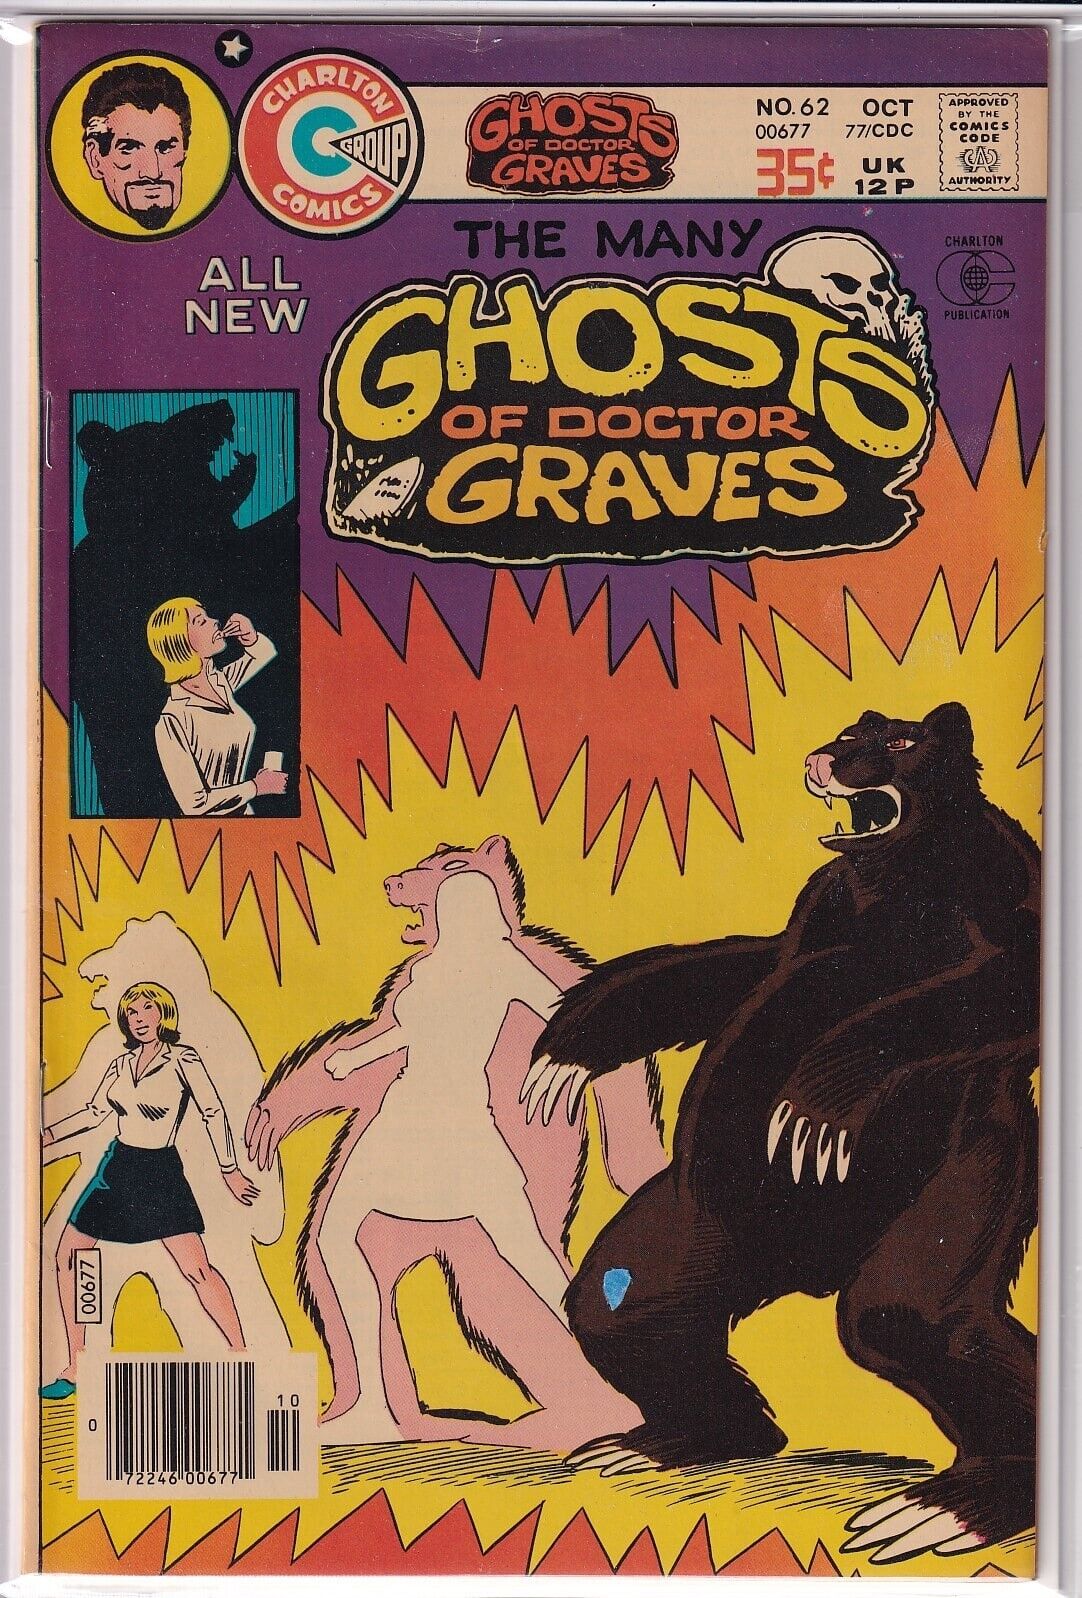 35511: Charlton MANY GHOSTS OF DR GRAVES #62 VF Grade